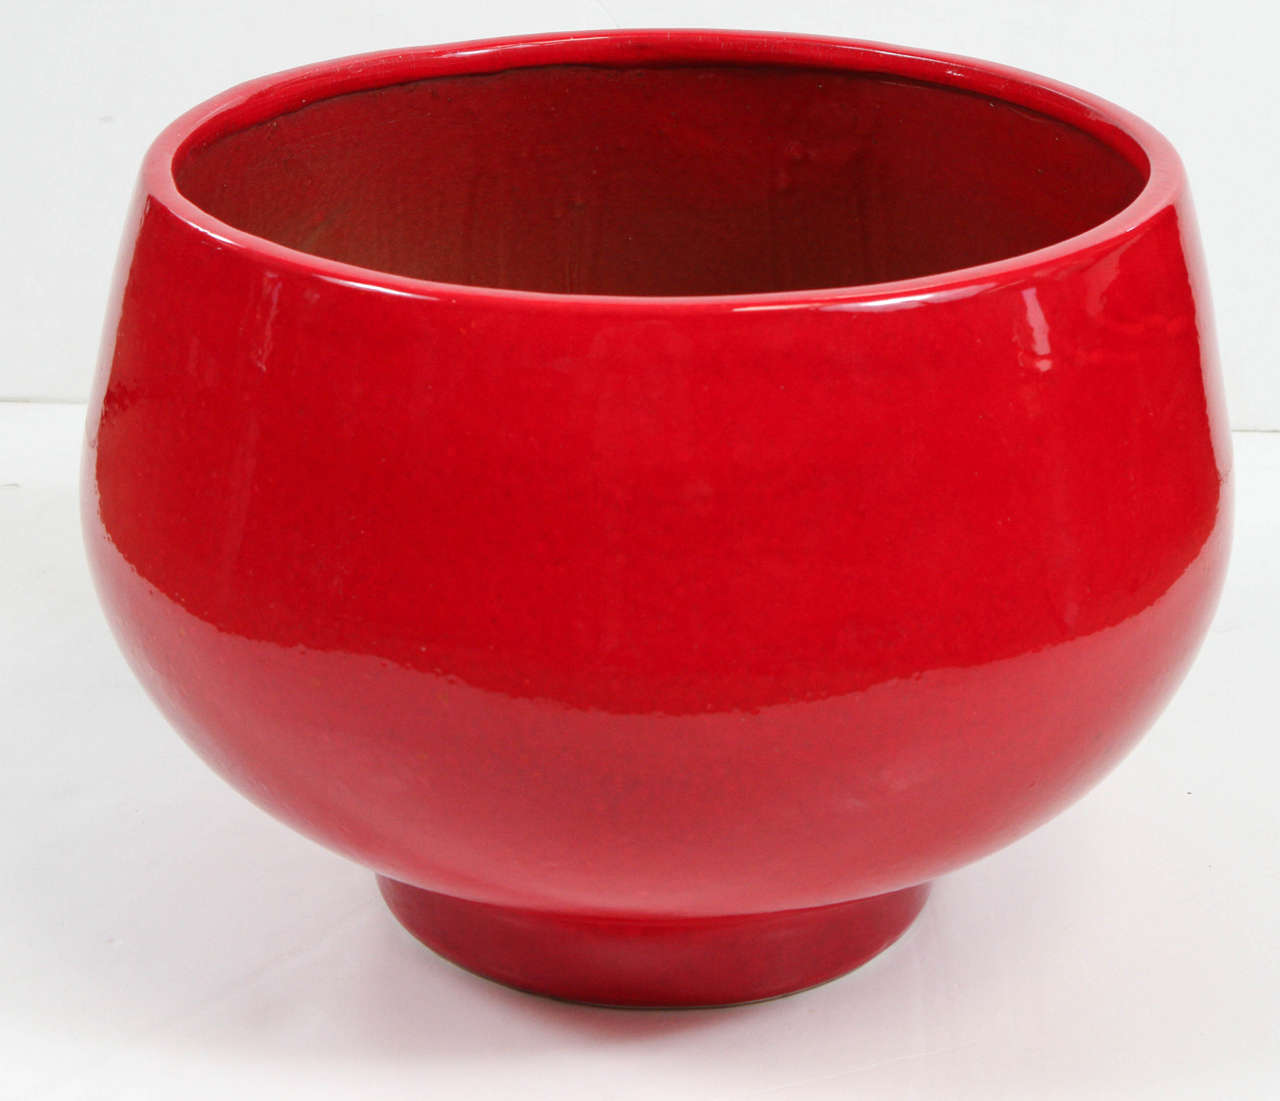 Large mid-century ceramic planter by Potited finished with a vibrant high gloss glaze